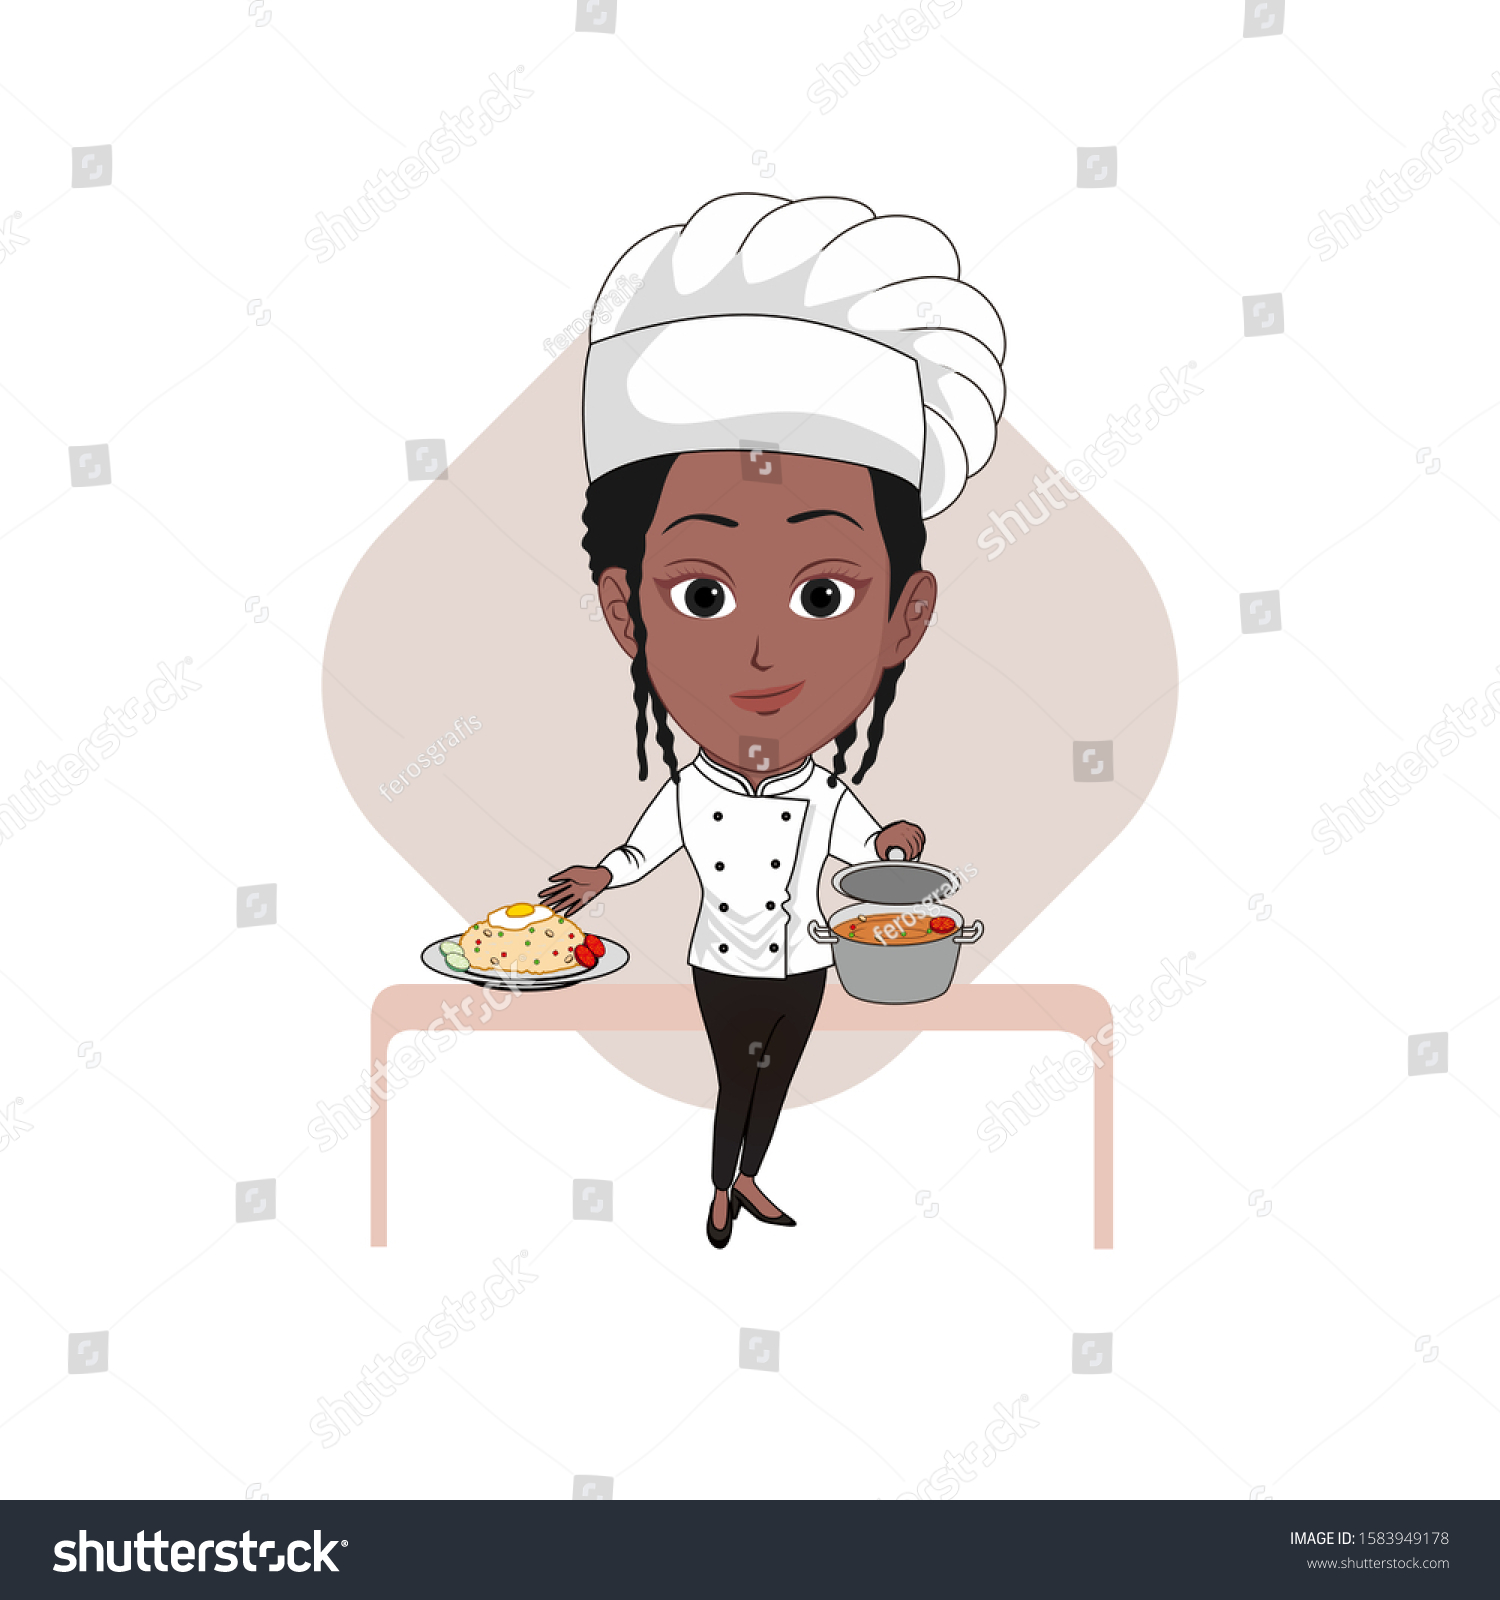 Woman chef clipart Stock Illustrations, Images & Vectors Shutterstock.